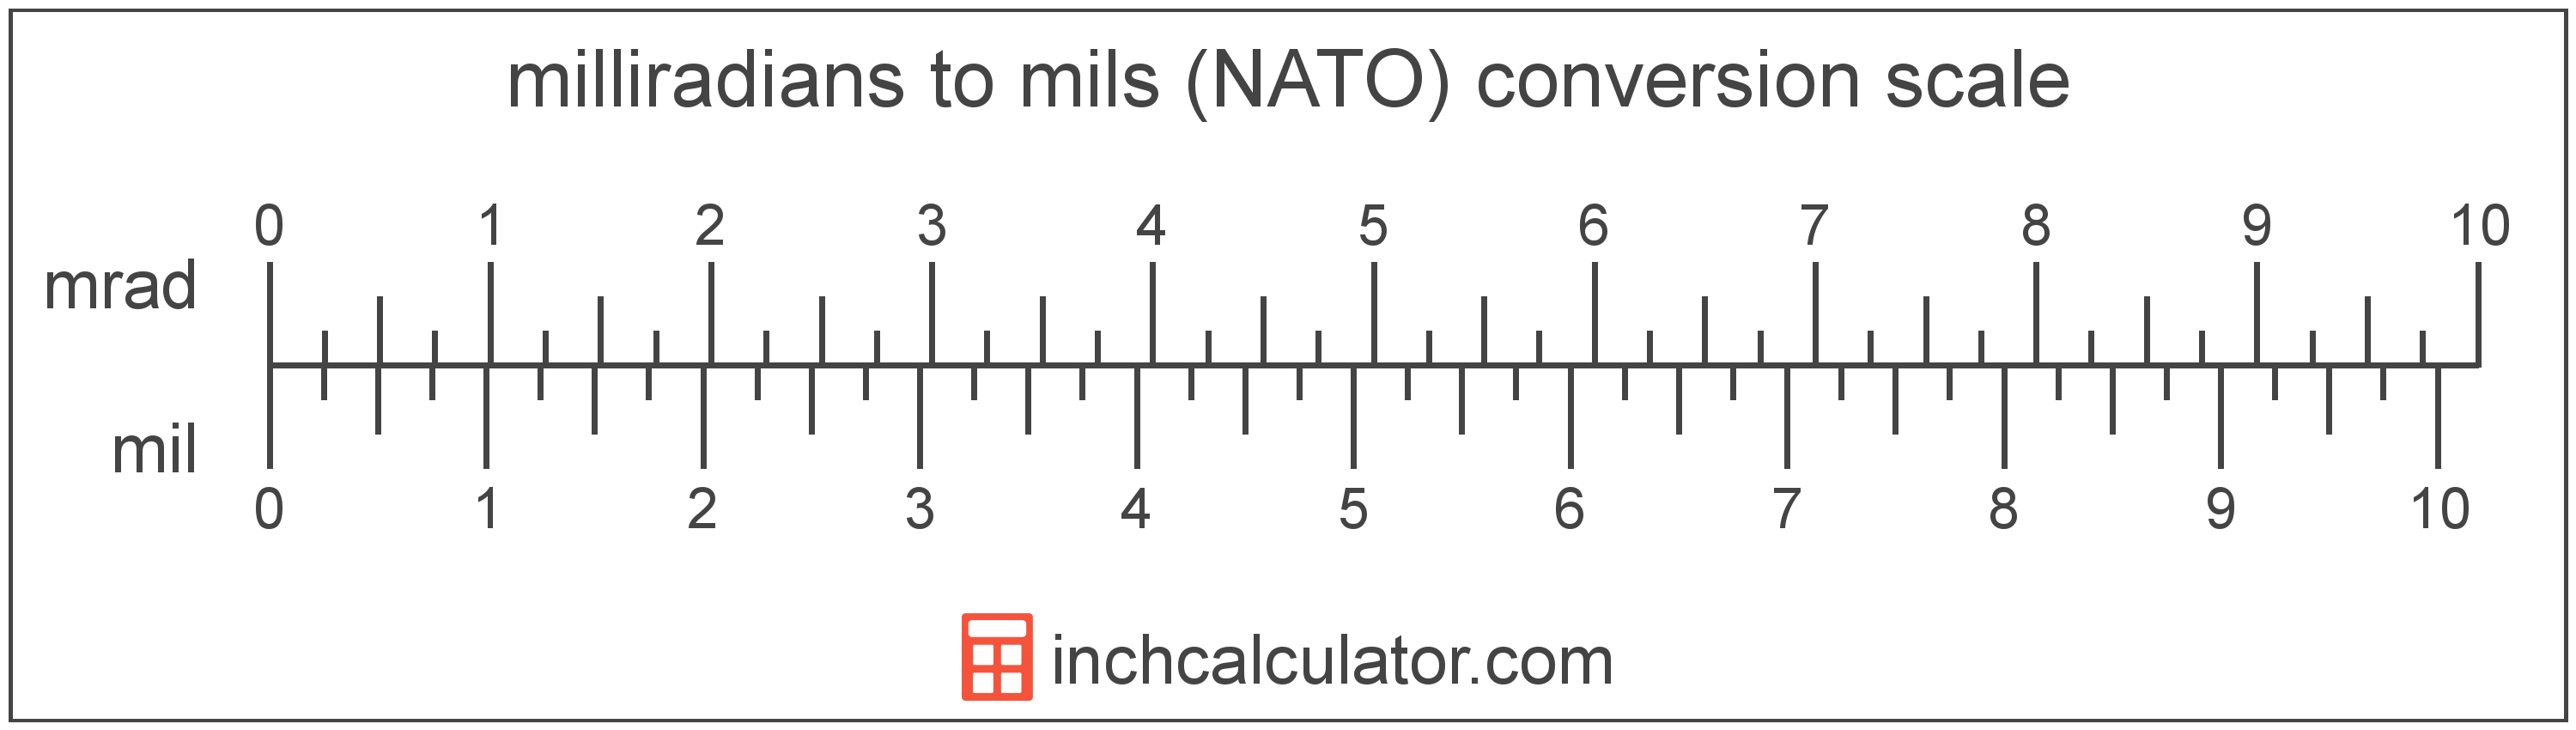 conversion scale showing milliradians and equivalent mils angle values